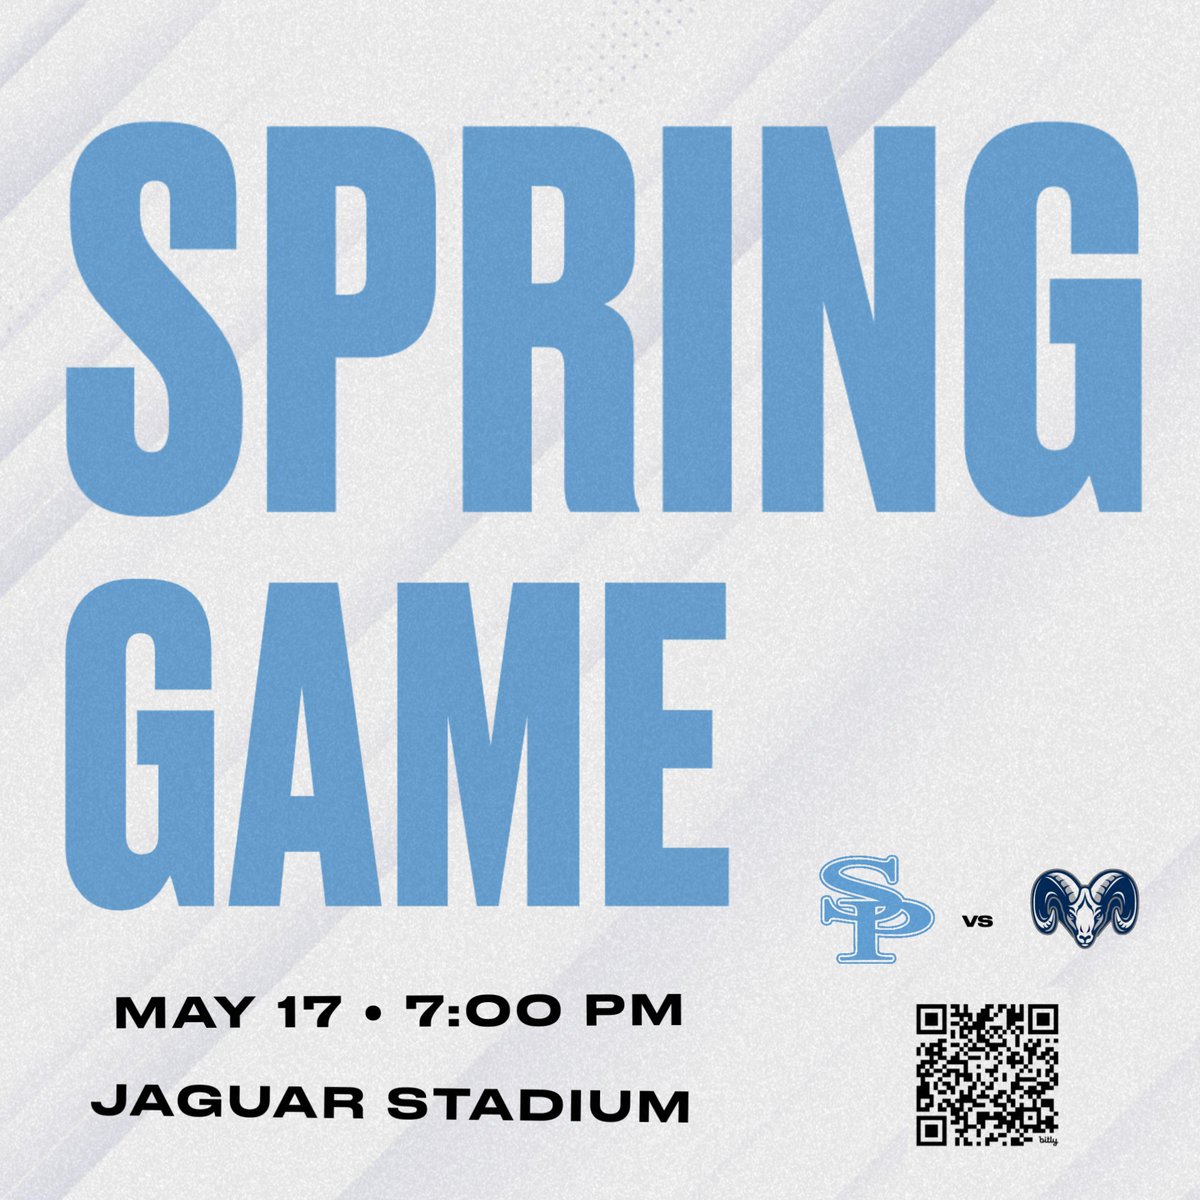 JAG NATION... It's game week!! Hope to see you Friday night at our spring game when we take on the Ramsay Rams at 7:00pm! Go ahead and get your tickets on the GoFan QR code so you can be ready! See you there!! #SPFootball #ItsComing